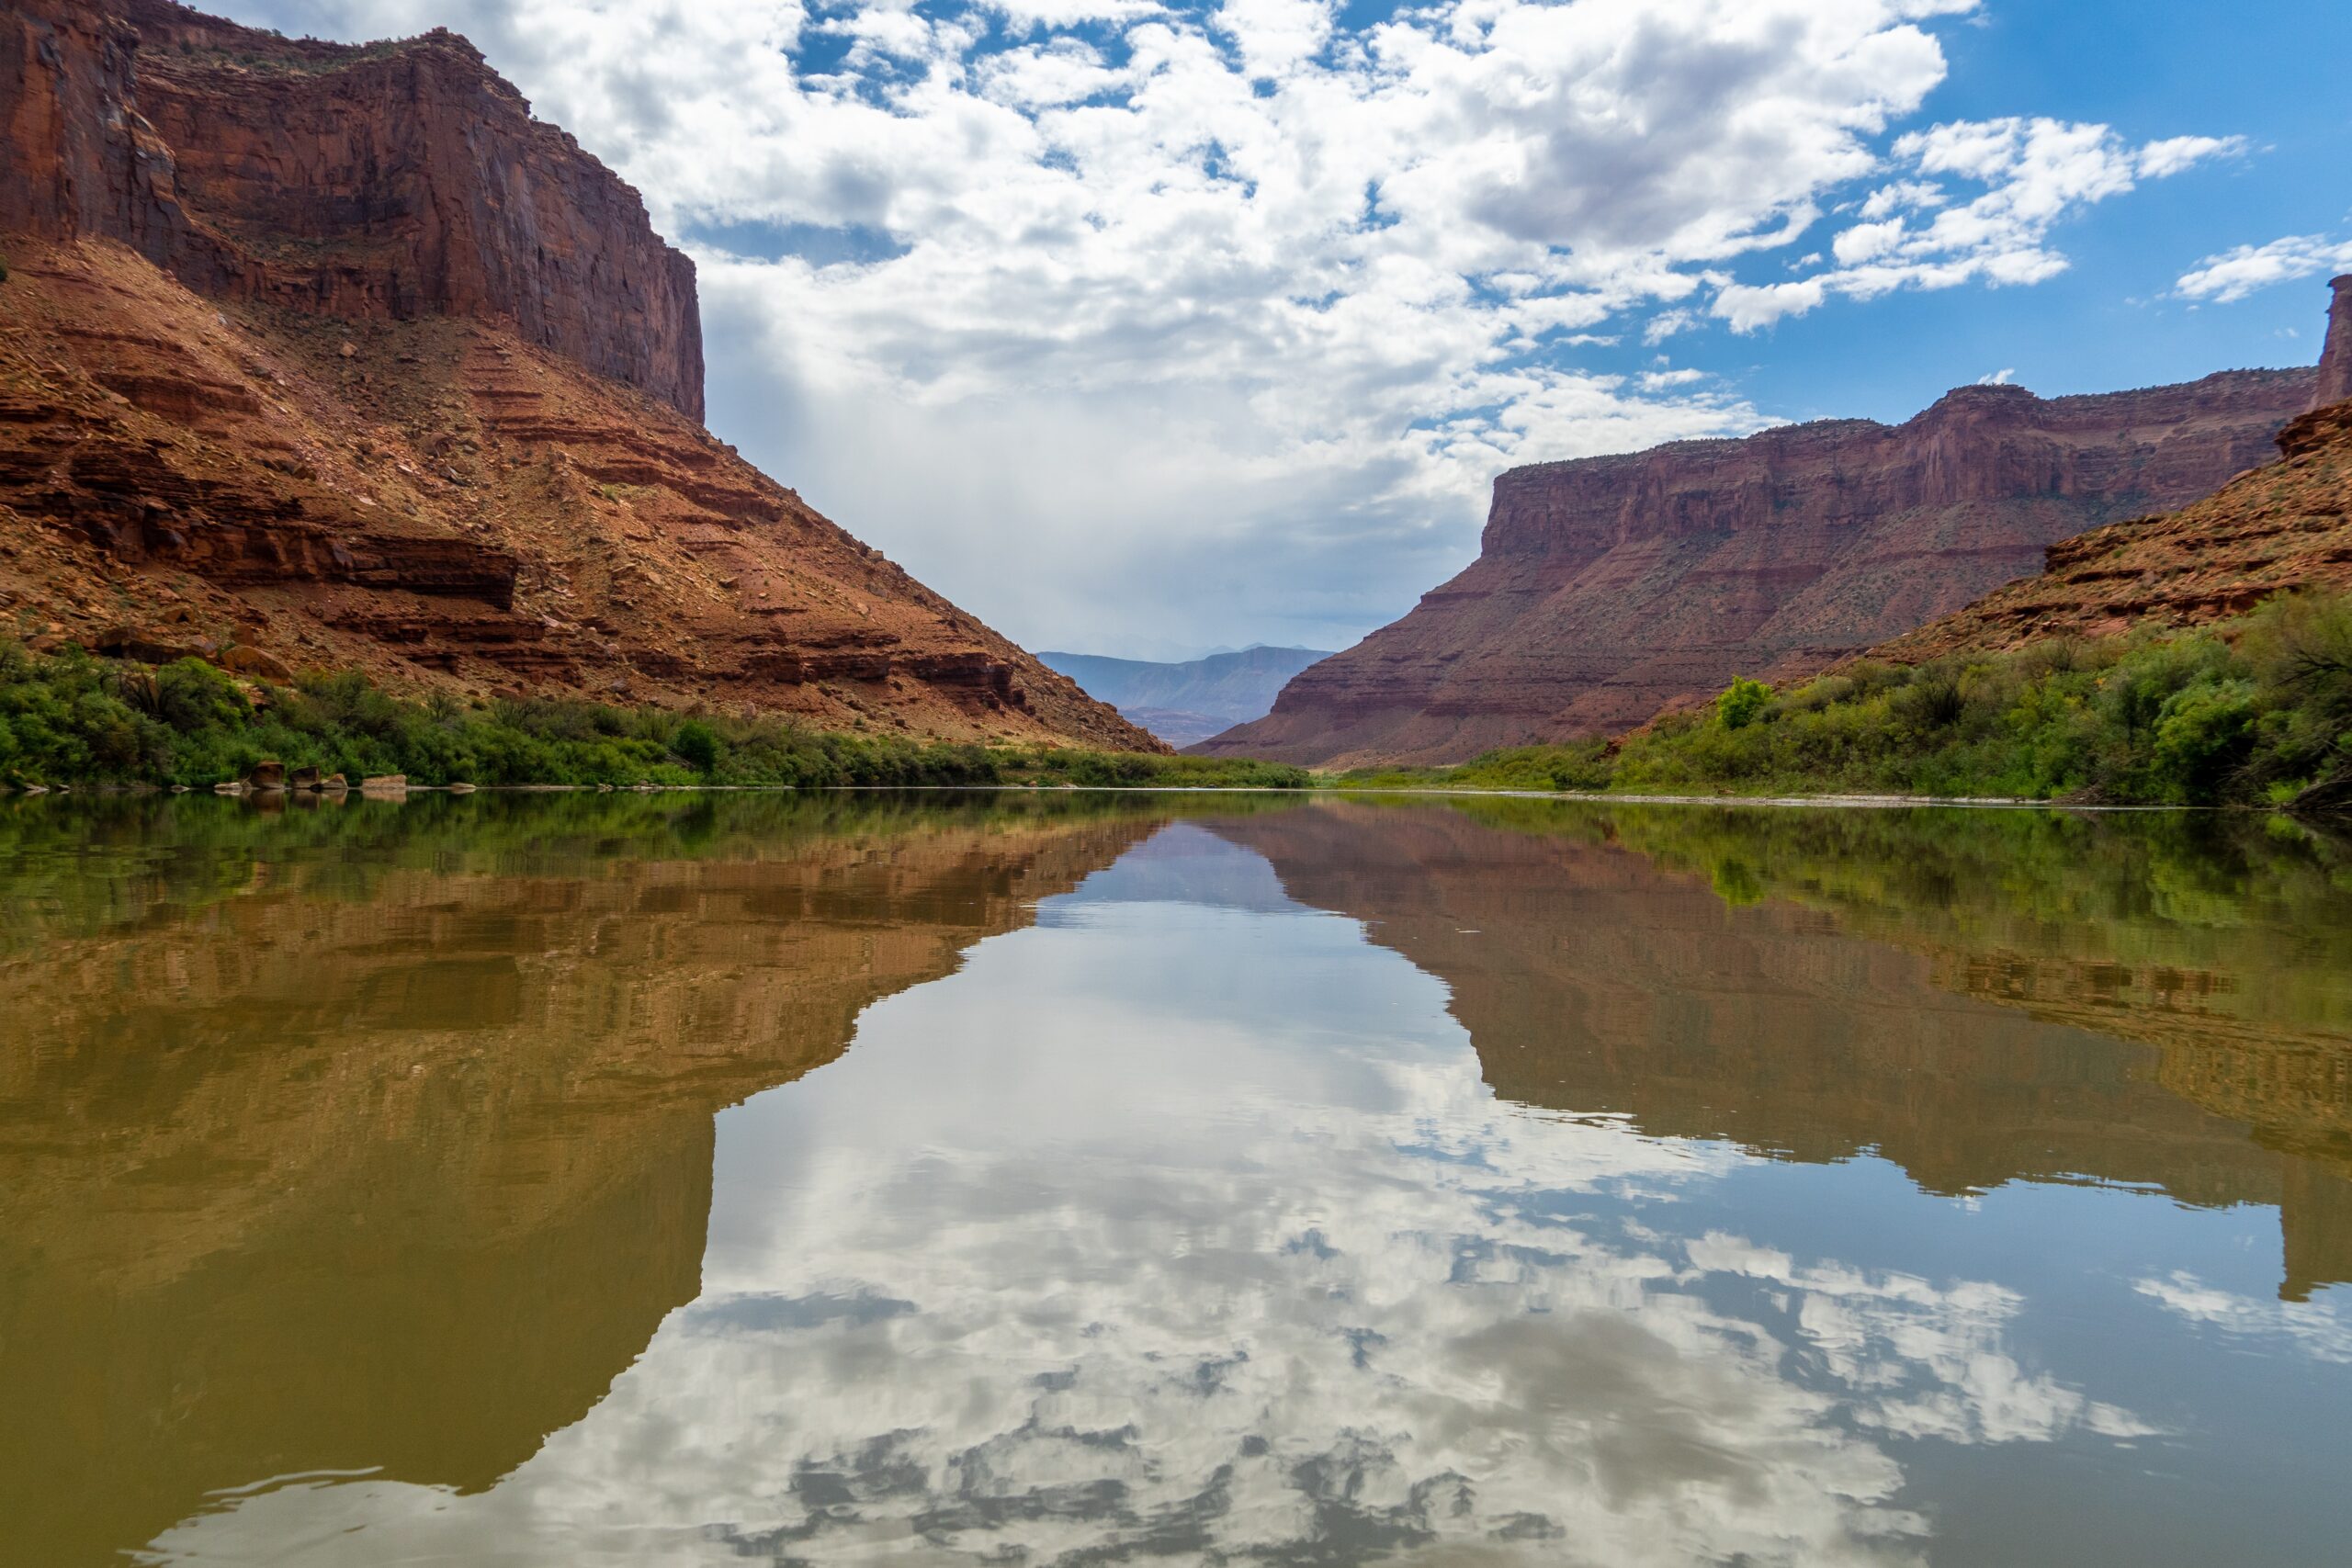 a view of the Colorado river, red canyon walls on either side of the water